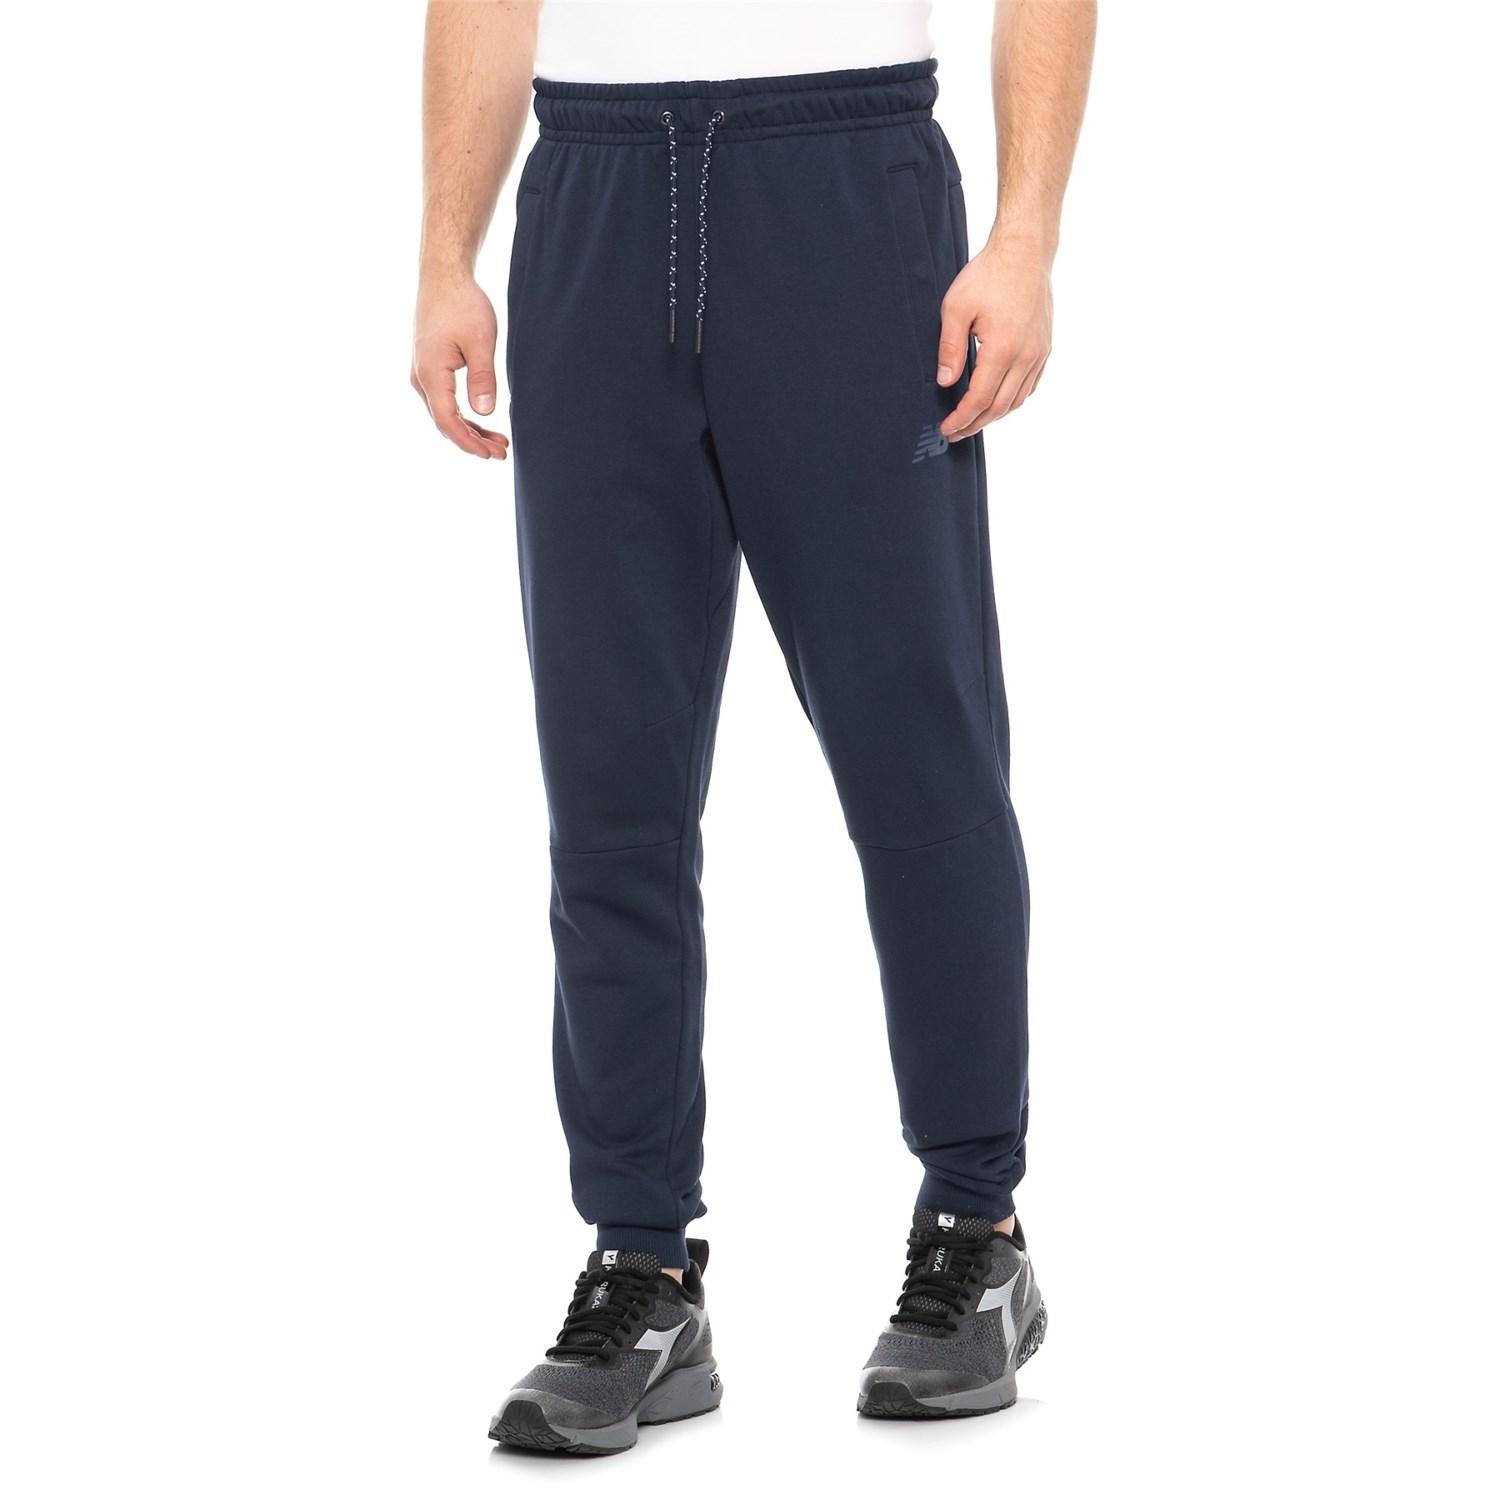 New Balance Cotton Athletics Knit Pants in Blue for Men - Save 25% - Lyst